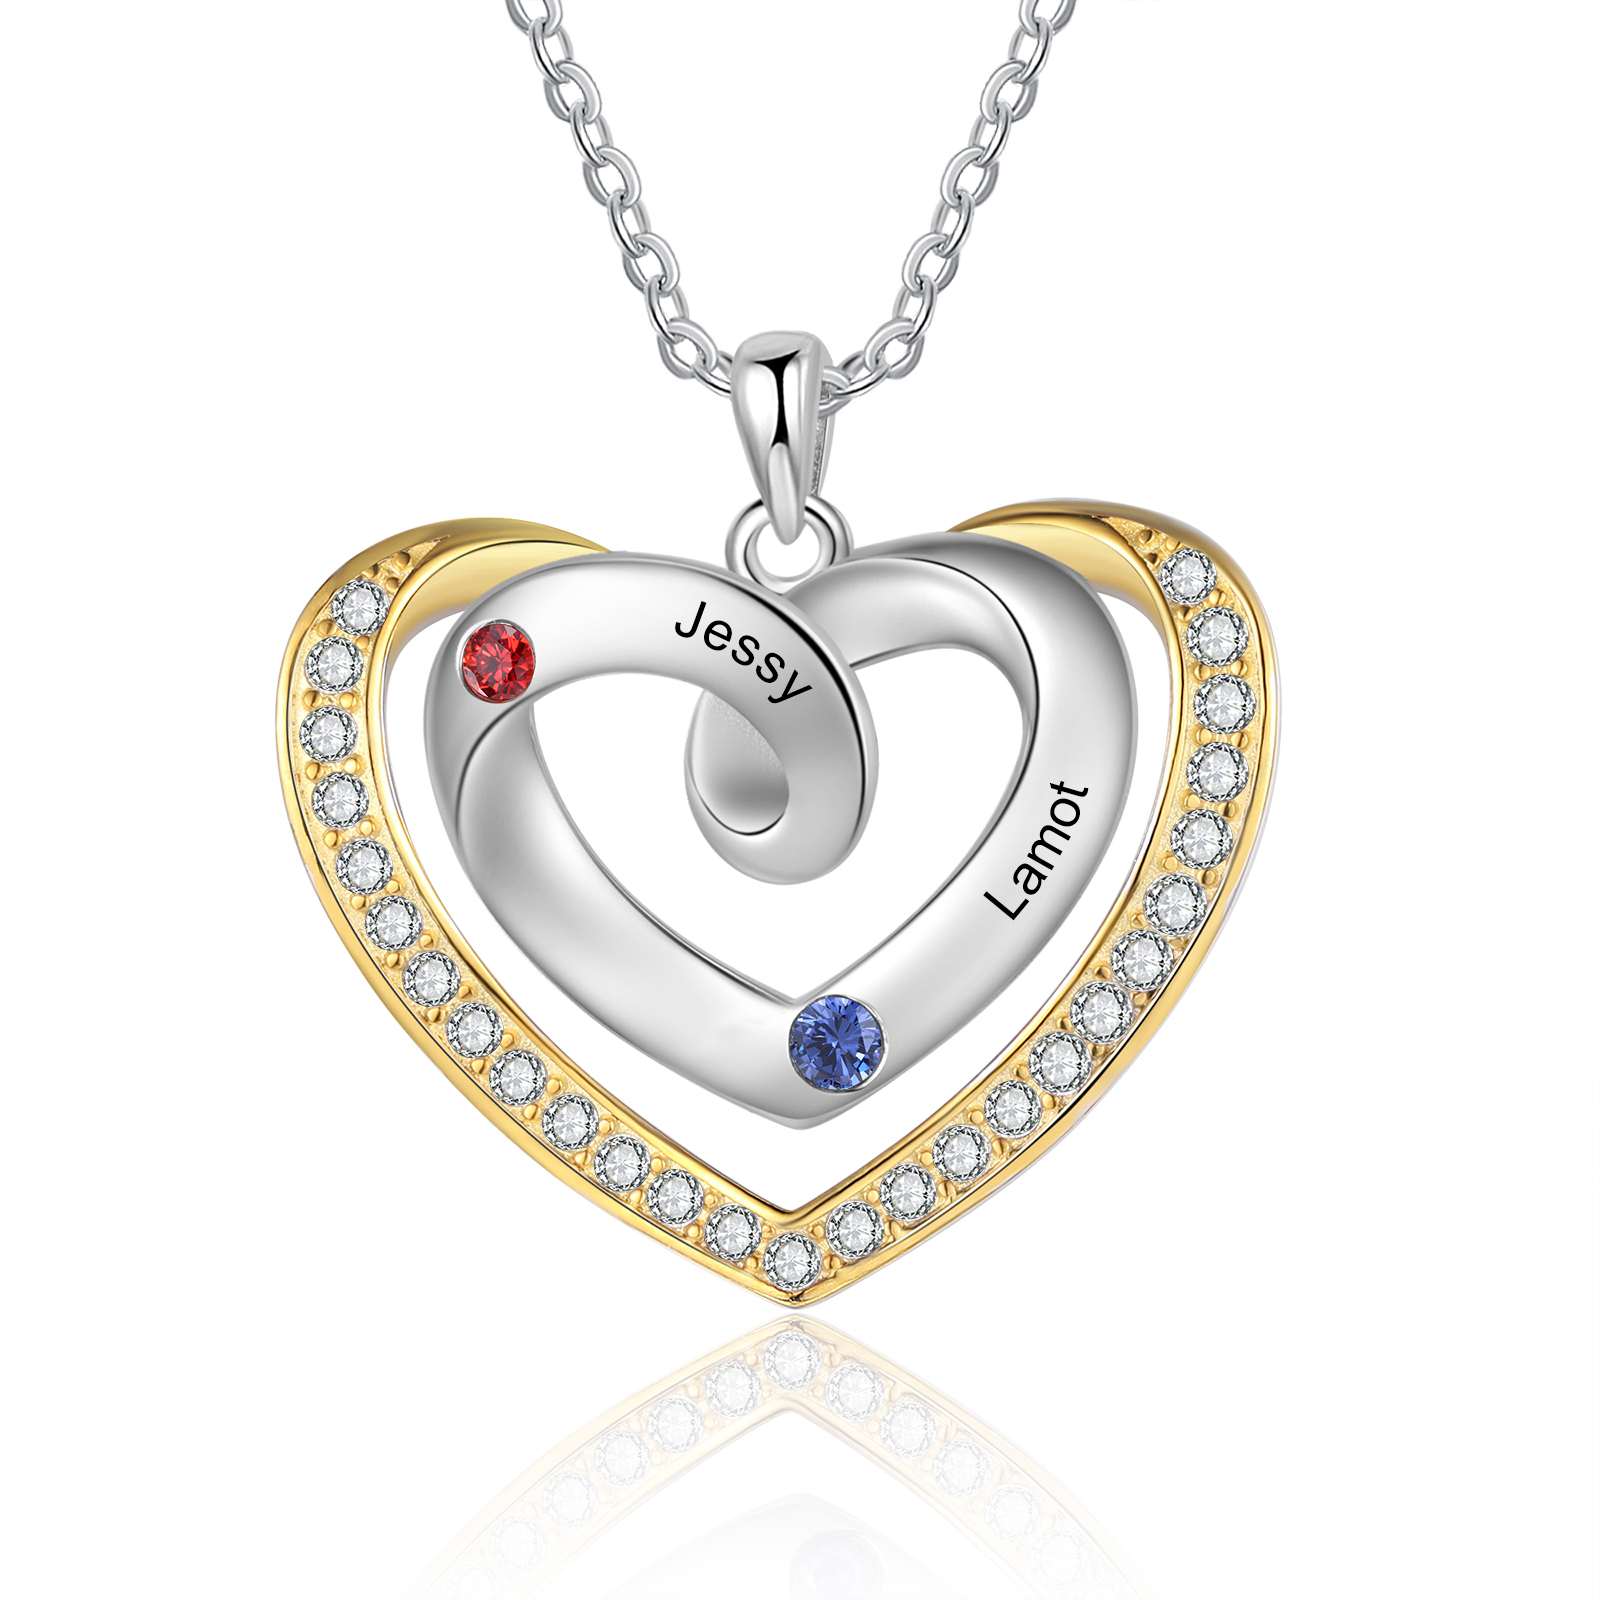 2 Names - Personalized Heart Necklace with Customized Names and Birthstone, A Perfect and Exquisite Gift for Her